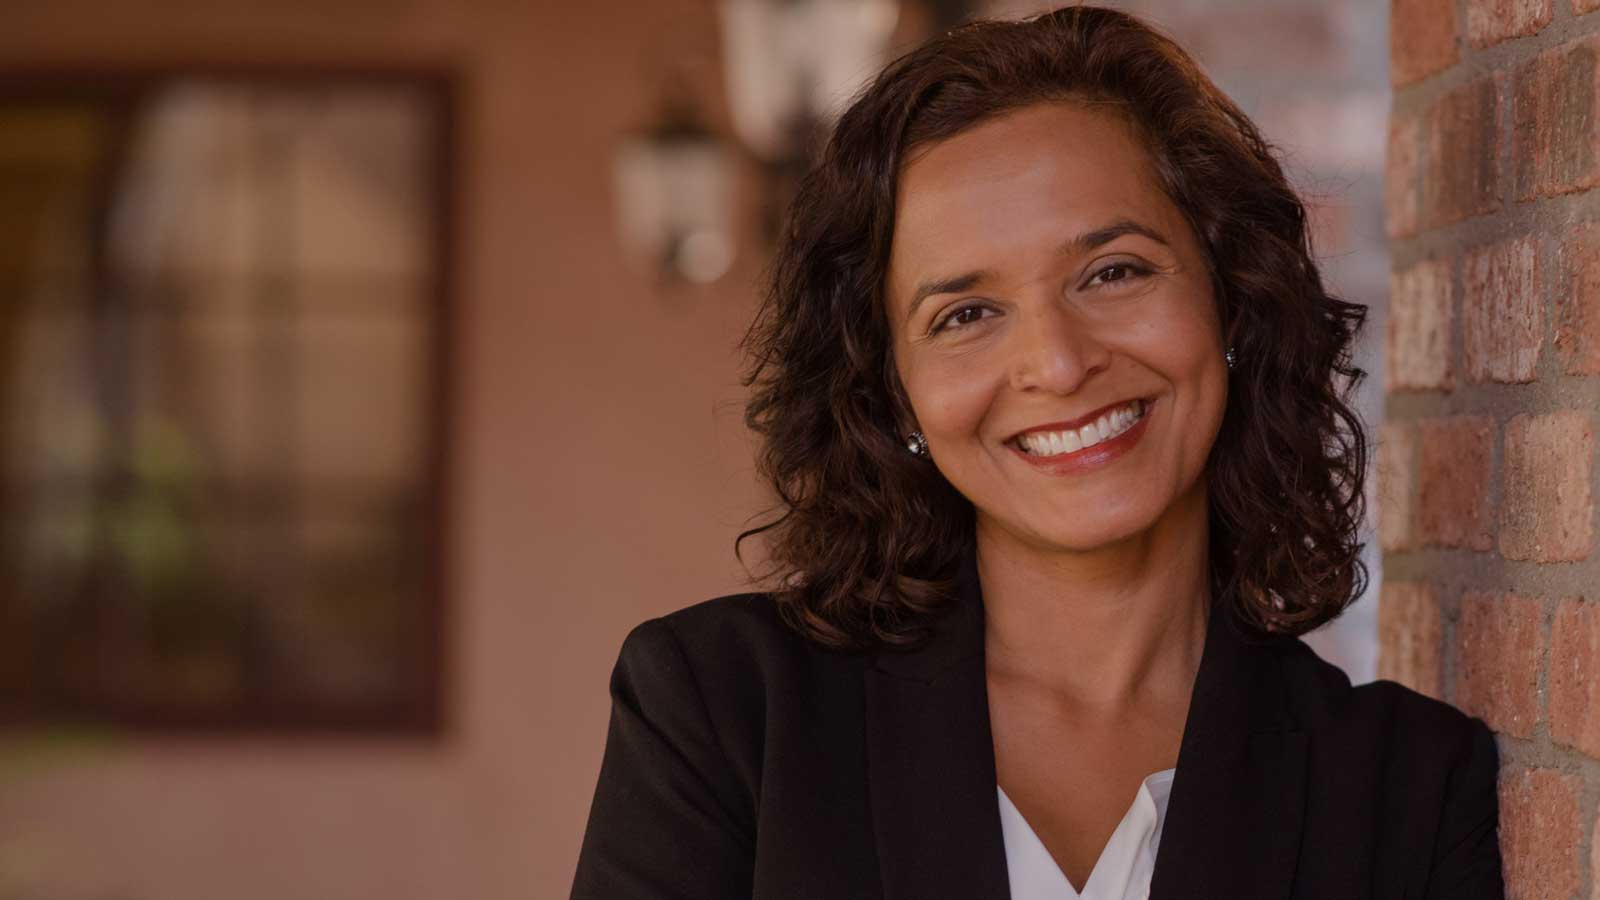 Dr Hiral Tipirneni - ER Physician and Cancer Research Advocate Arizona's 8th District